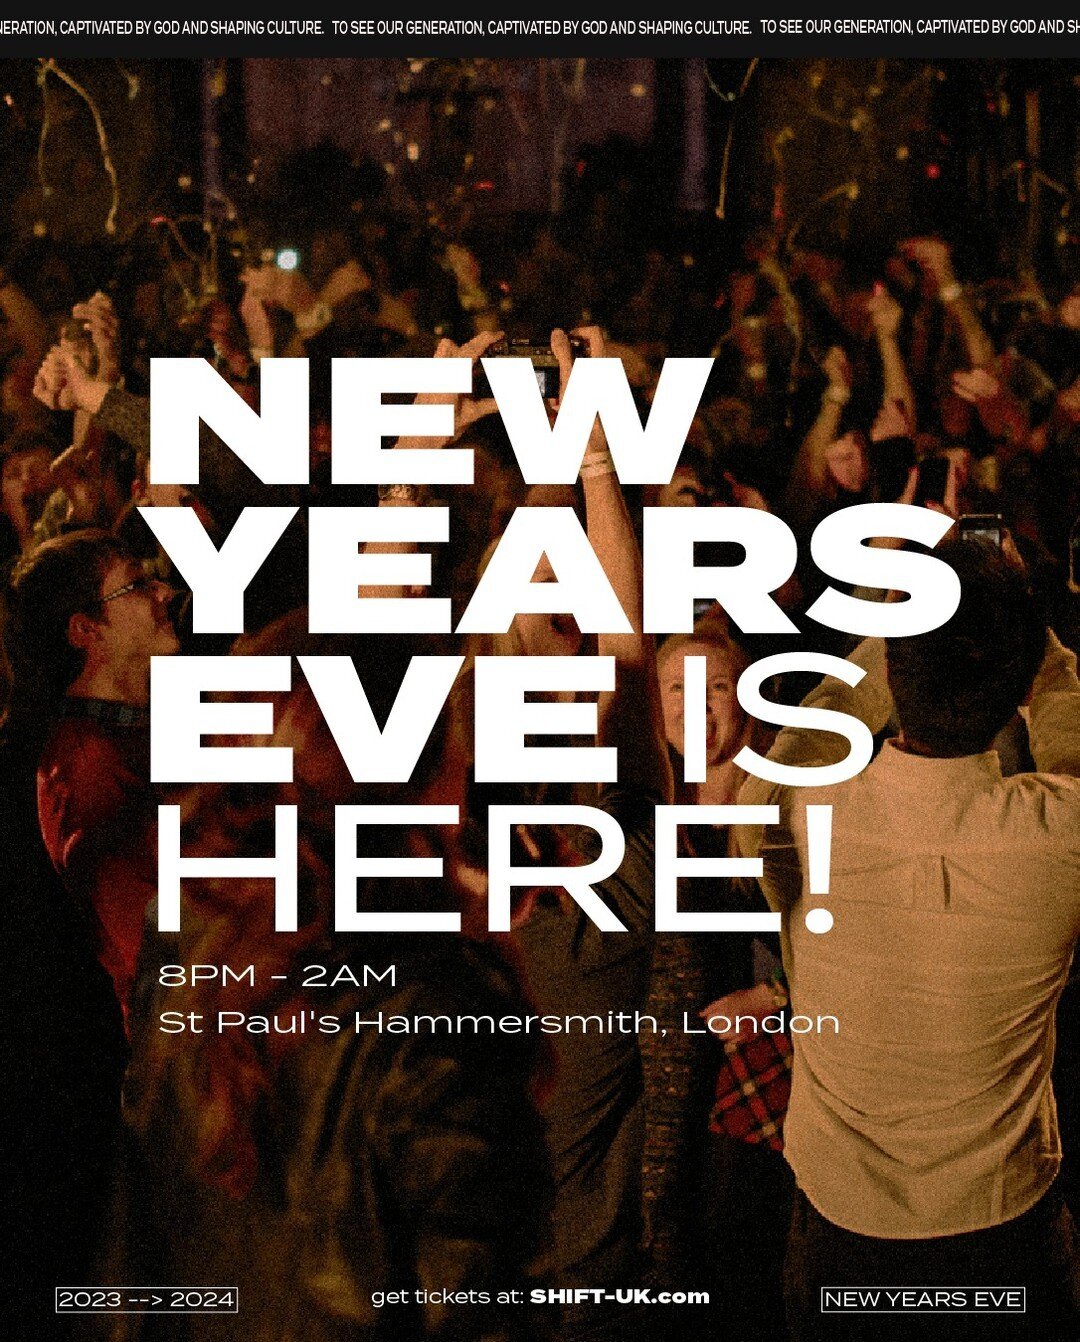 Join us tonight to start a new year with friends new and old 🎉 🥳 

Live music, worship, countdown, DJ till 2am. Food and drinks available

Tickets online: &pound;15.00 (link in bio)
Tickets on the doors: &pound;20.00

Doors 8pm, last entry 12am

#B